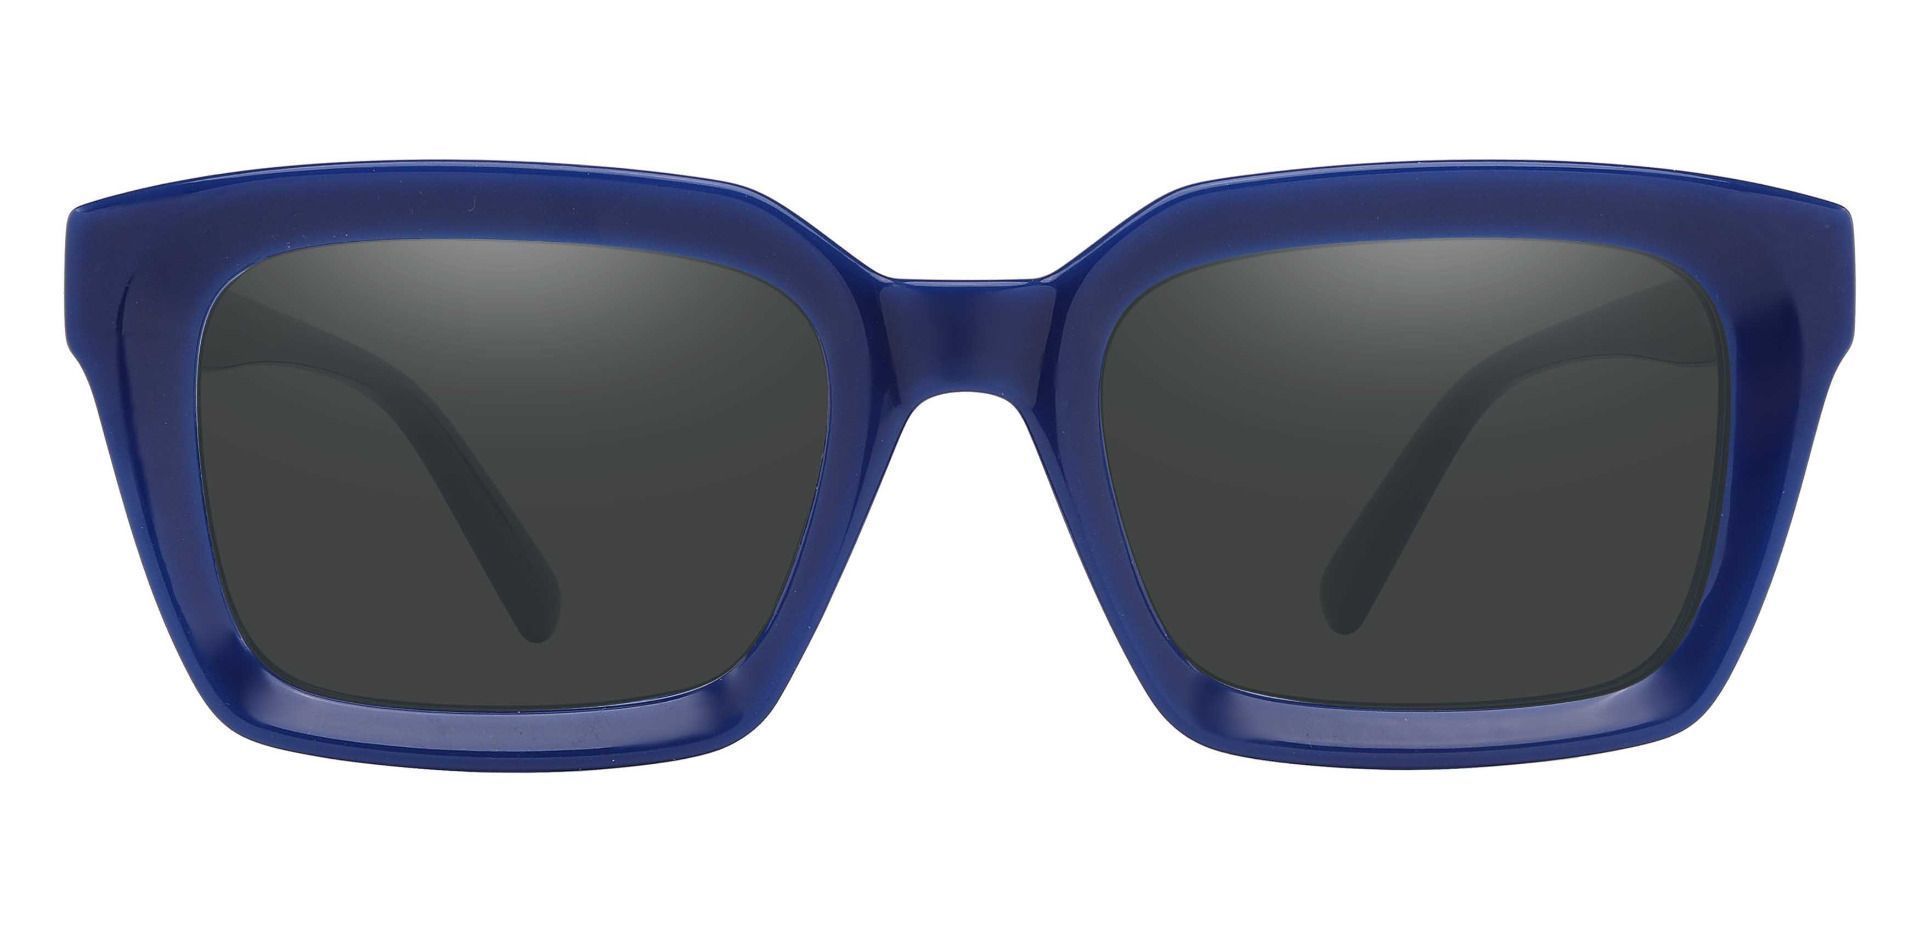 Unity Rectangle Reading Sunglasses - Blue Frame With Gray Lenses